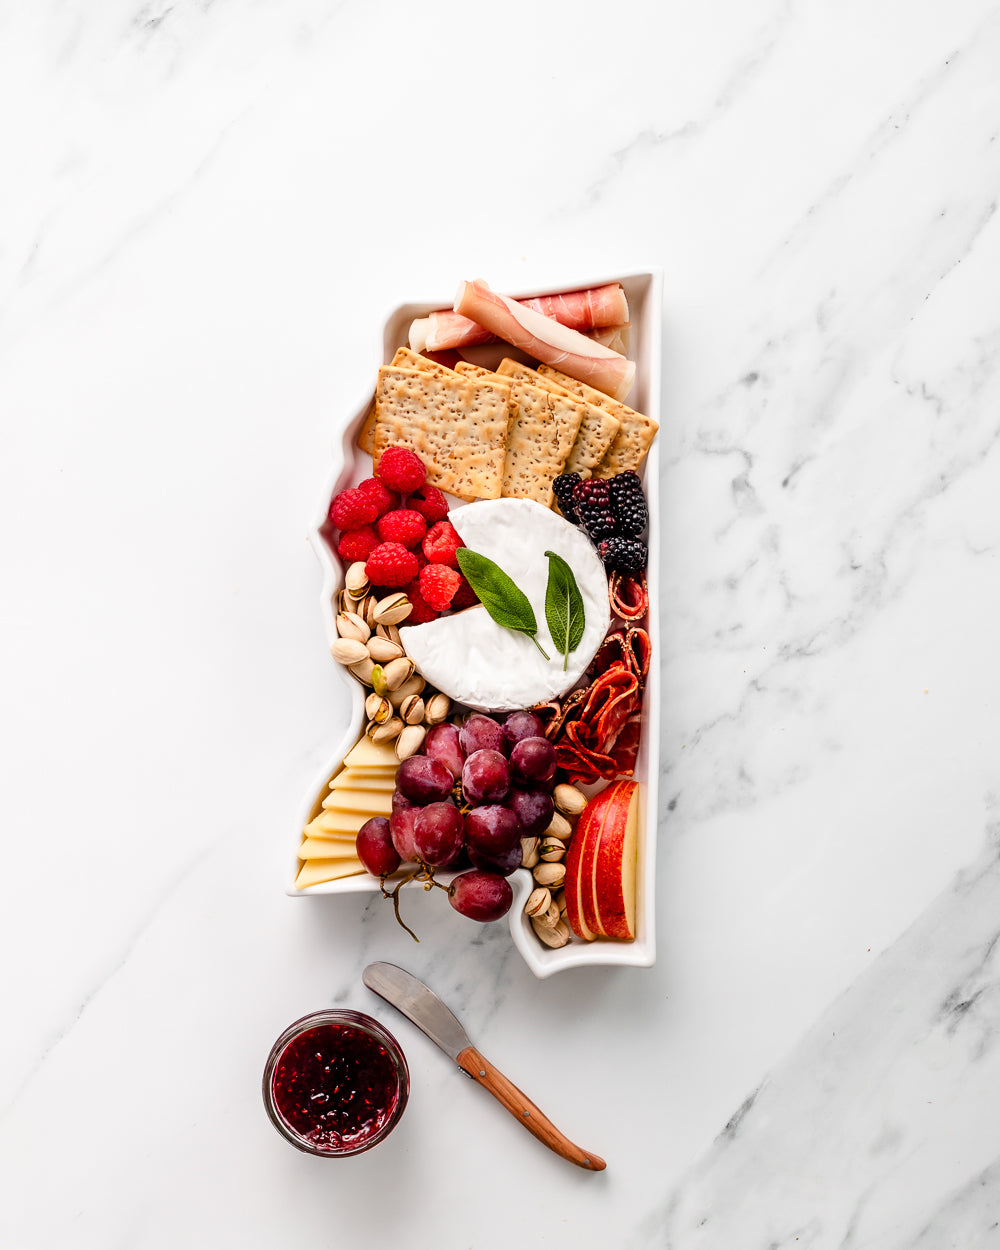 charcuterie board with cheese and cured meats in a Mississippi shaped serving tray platter dish